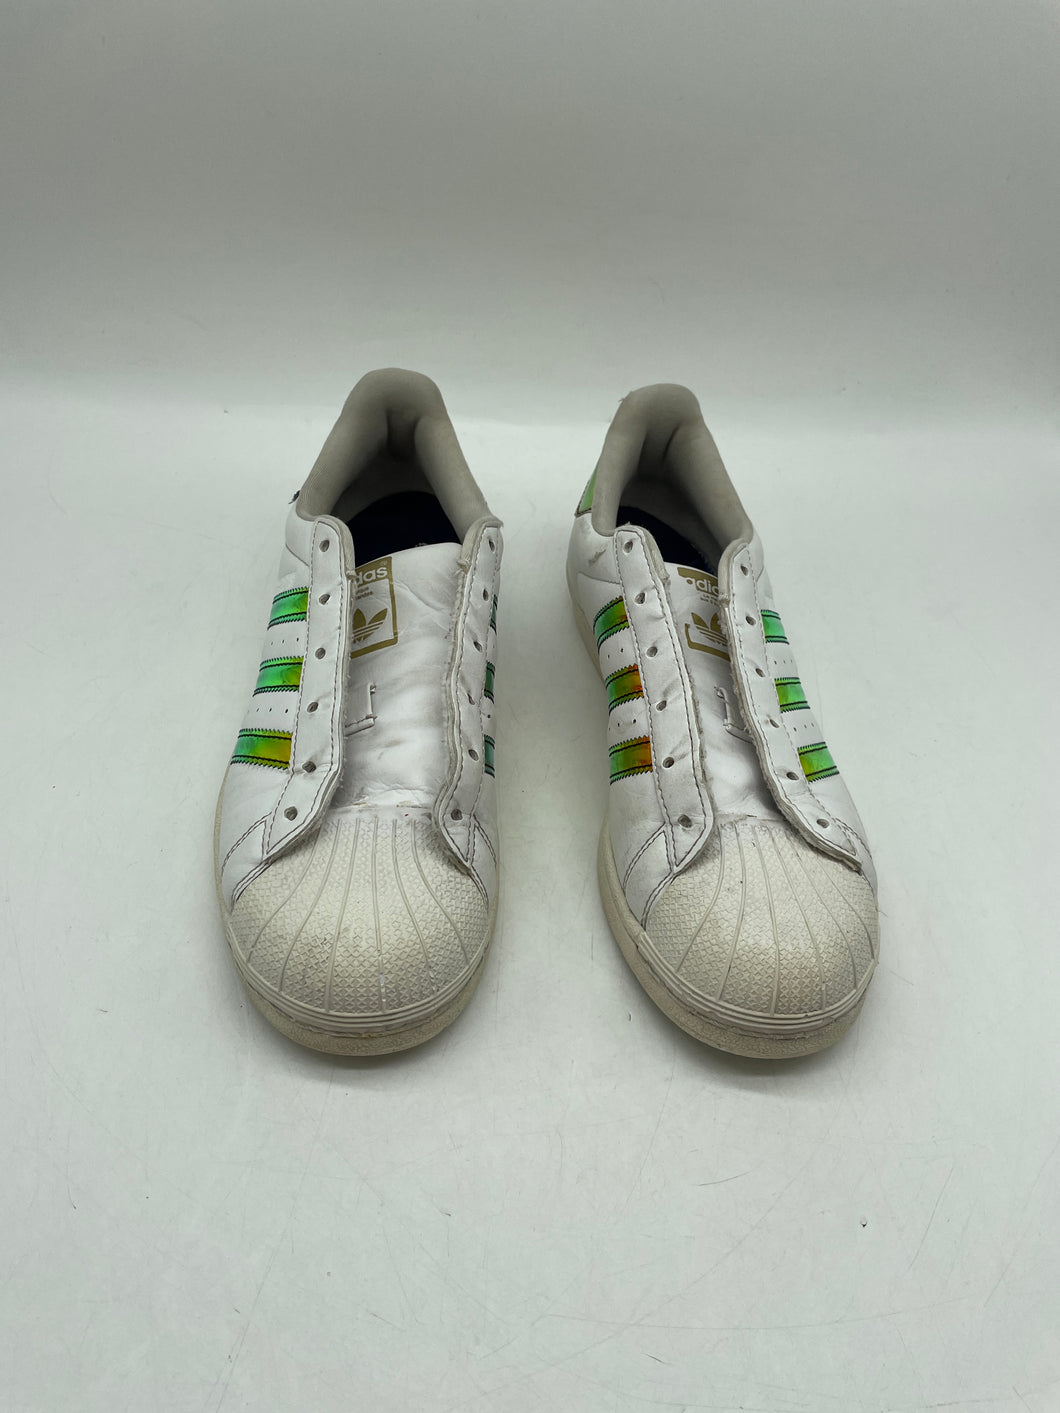 Adidas Boys Superstar White Leather Lace Up Low Top Sneakers Shoes Size 5